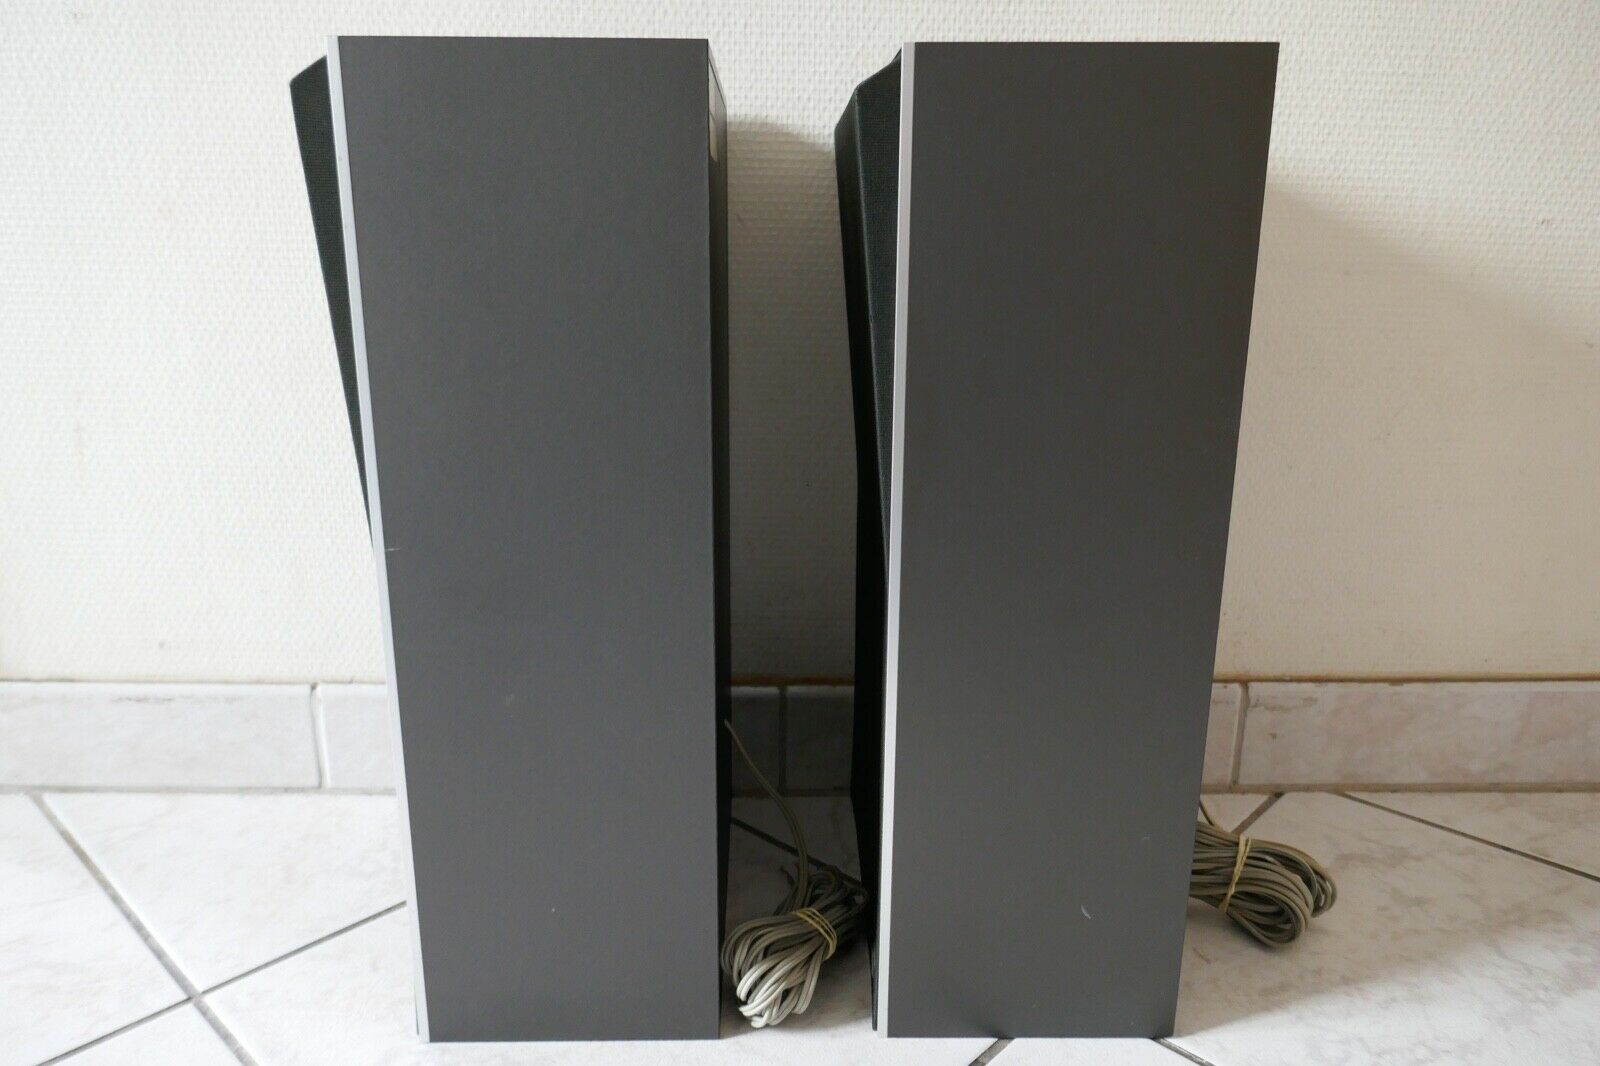 enceintes speakers band &amp; olufsen beovox x35 vintage occasion